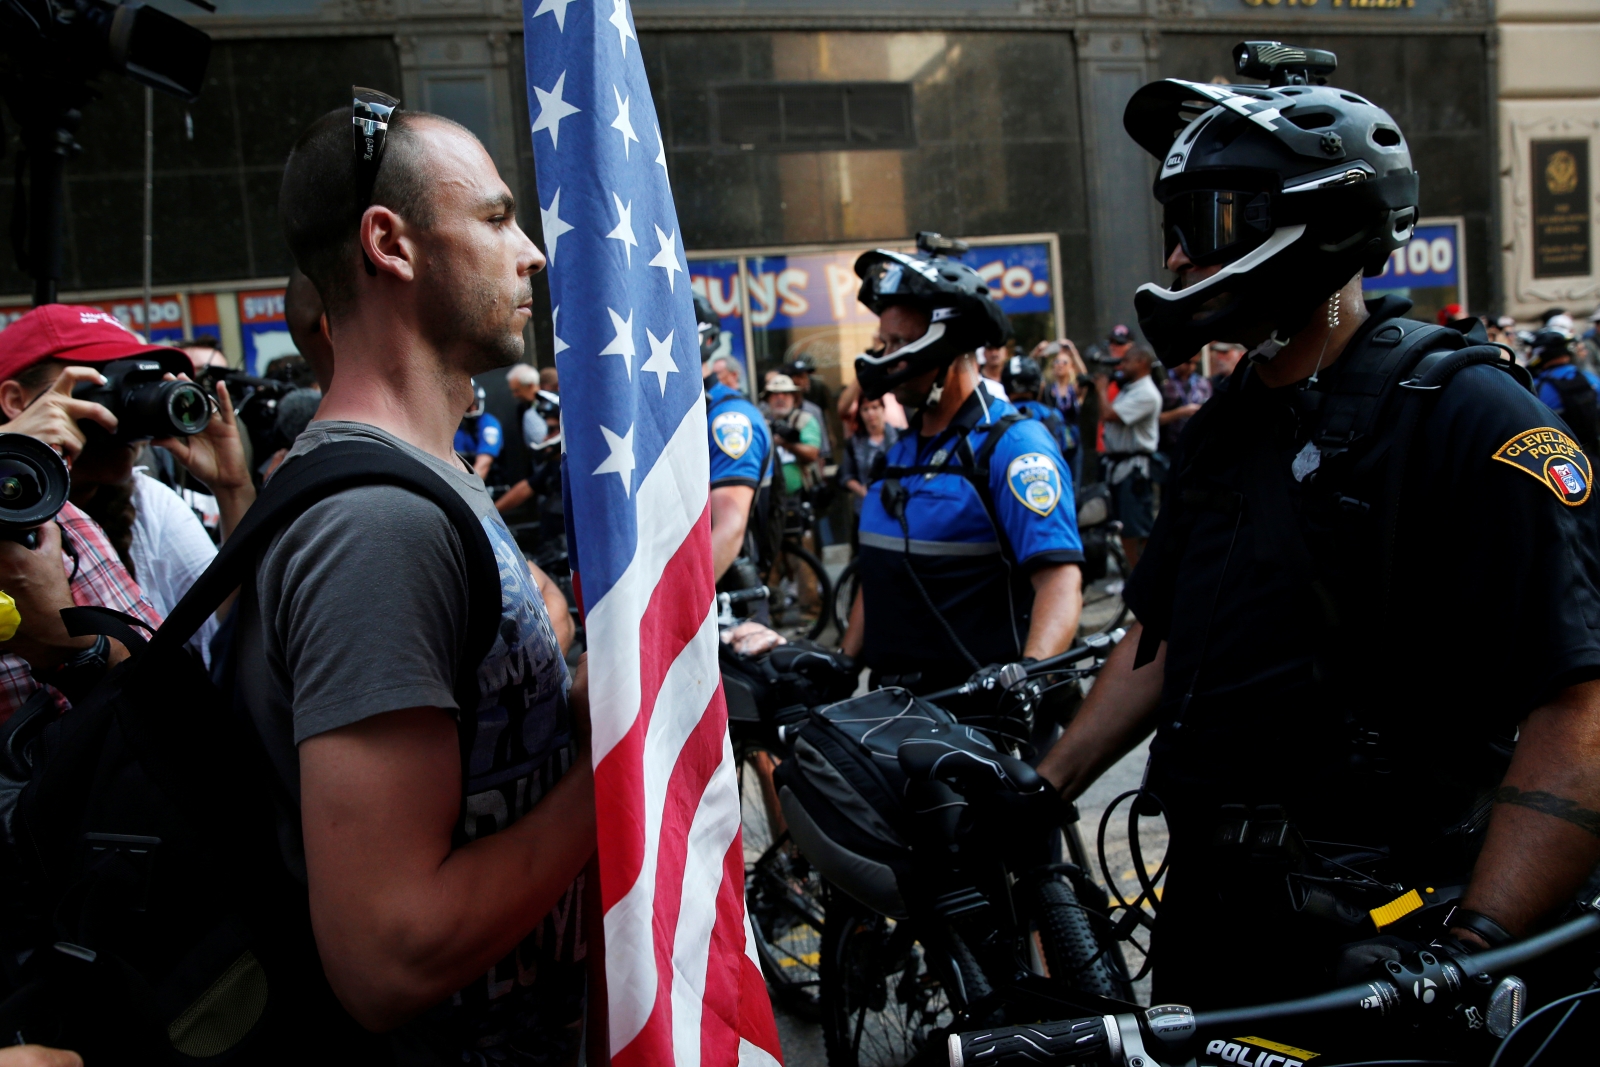 Police move to cool mounting tension between Trump supporters and foes ...